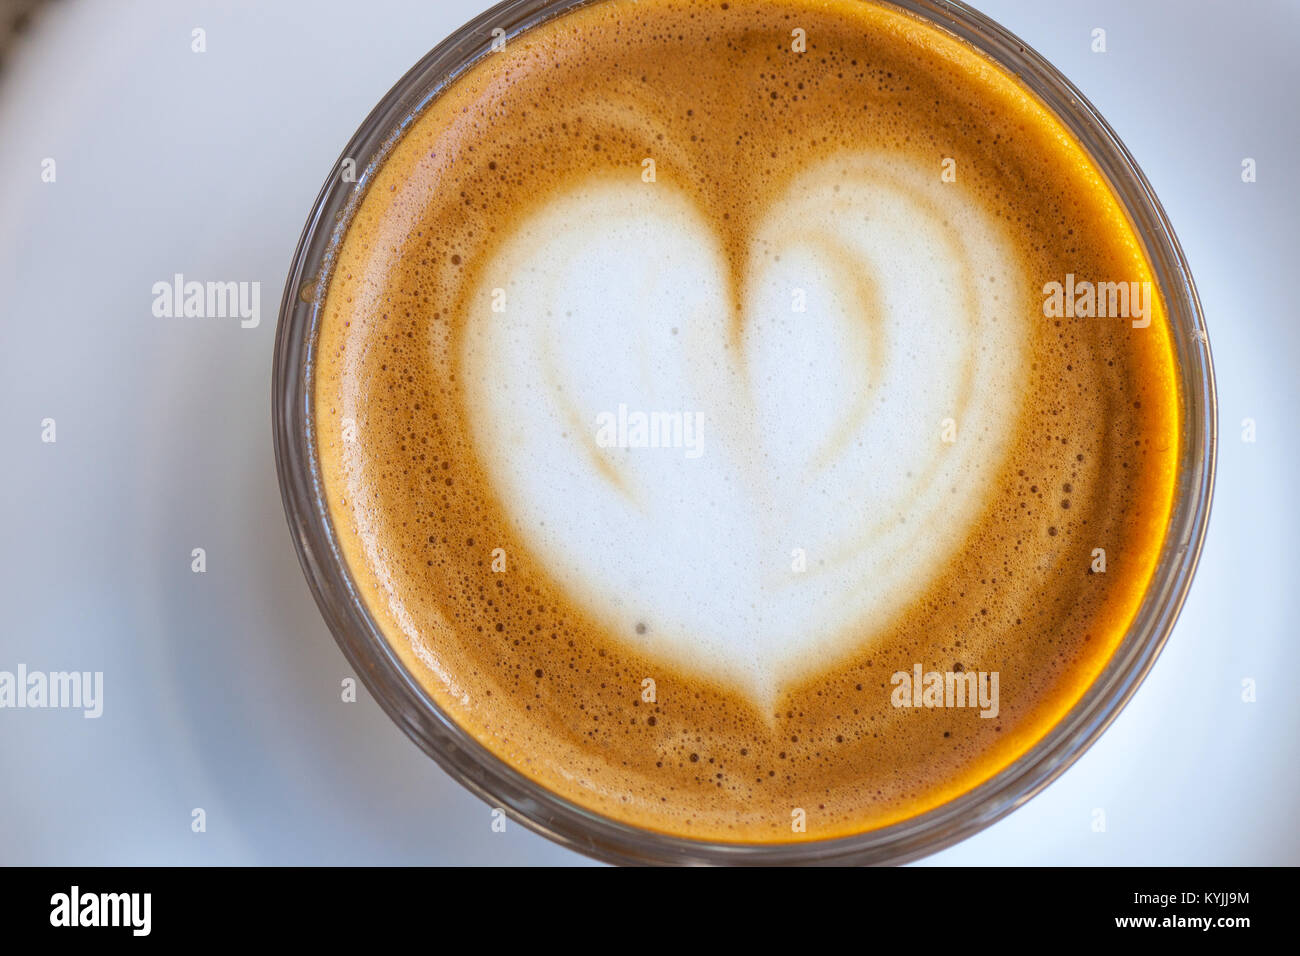 Top view of cortado coffee in a glass with the foam in shape of heart Stock Photo